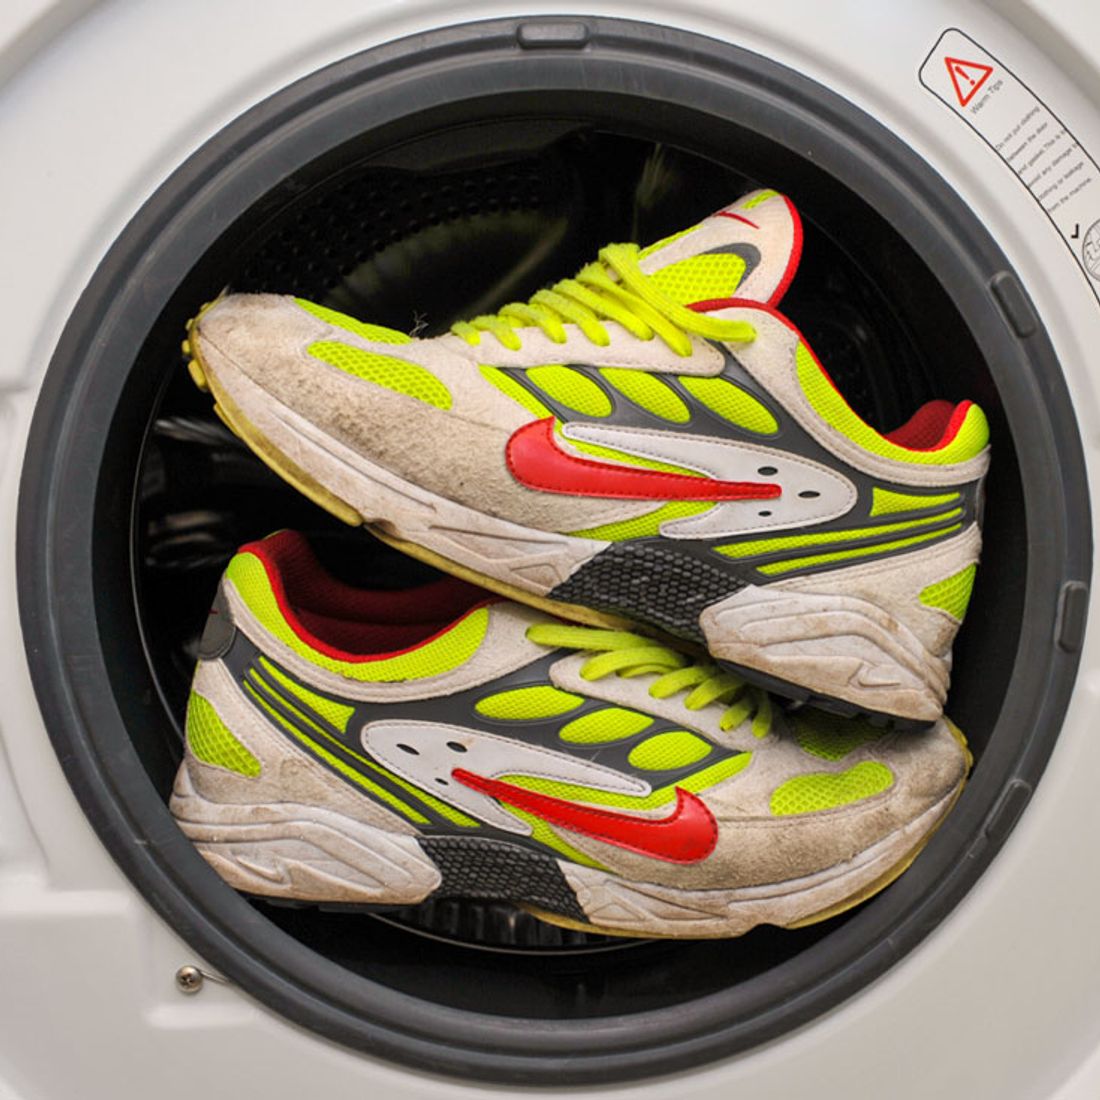 dart interferens whisky How to Safely Clean Sneakers in the Washing Machine - Sneaker Freaker